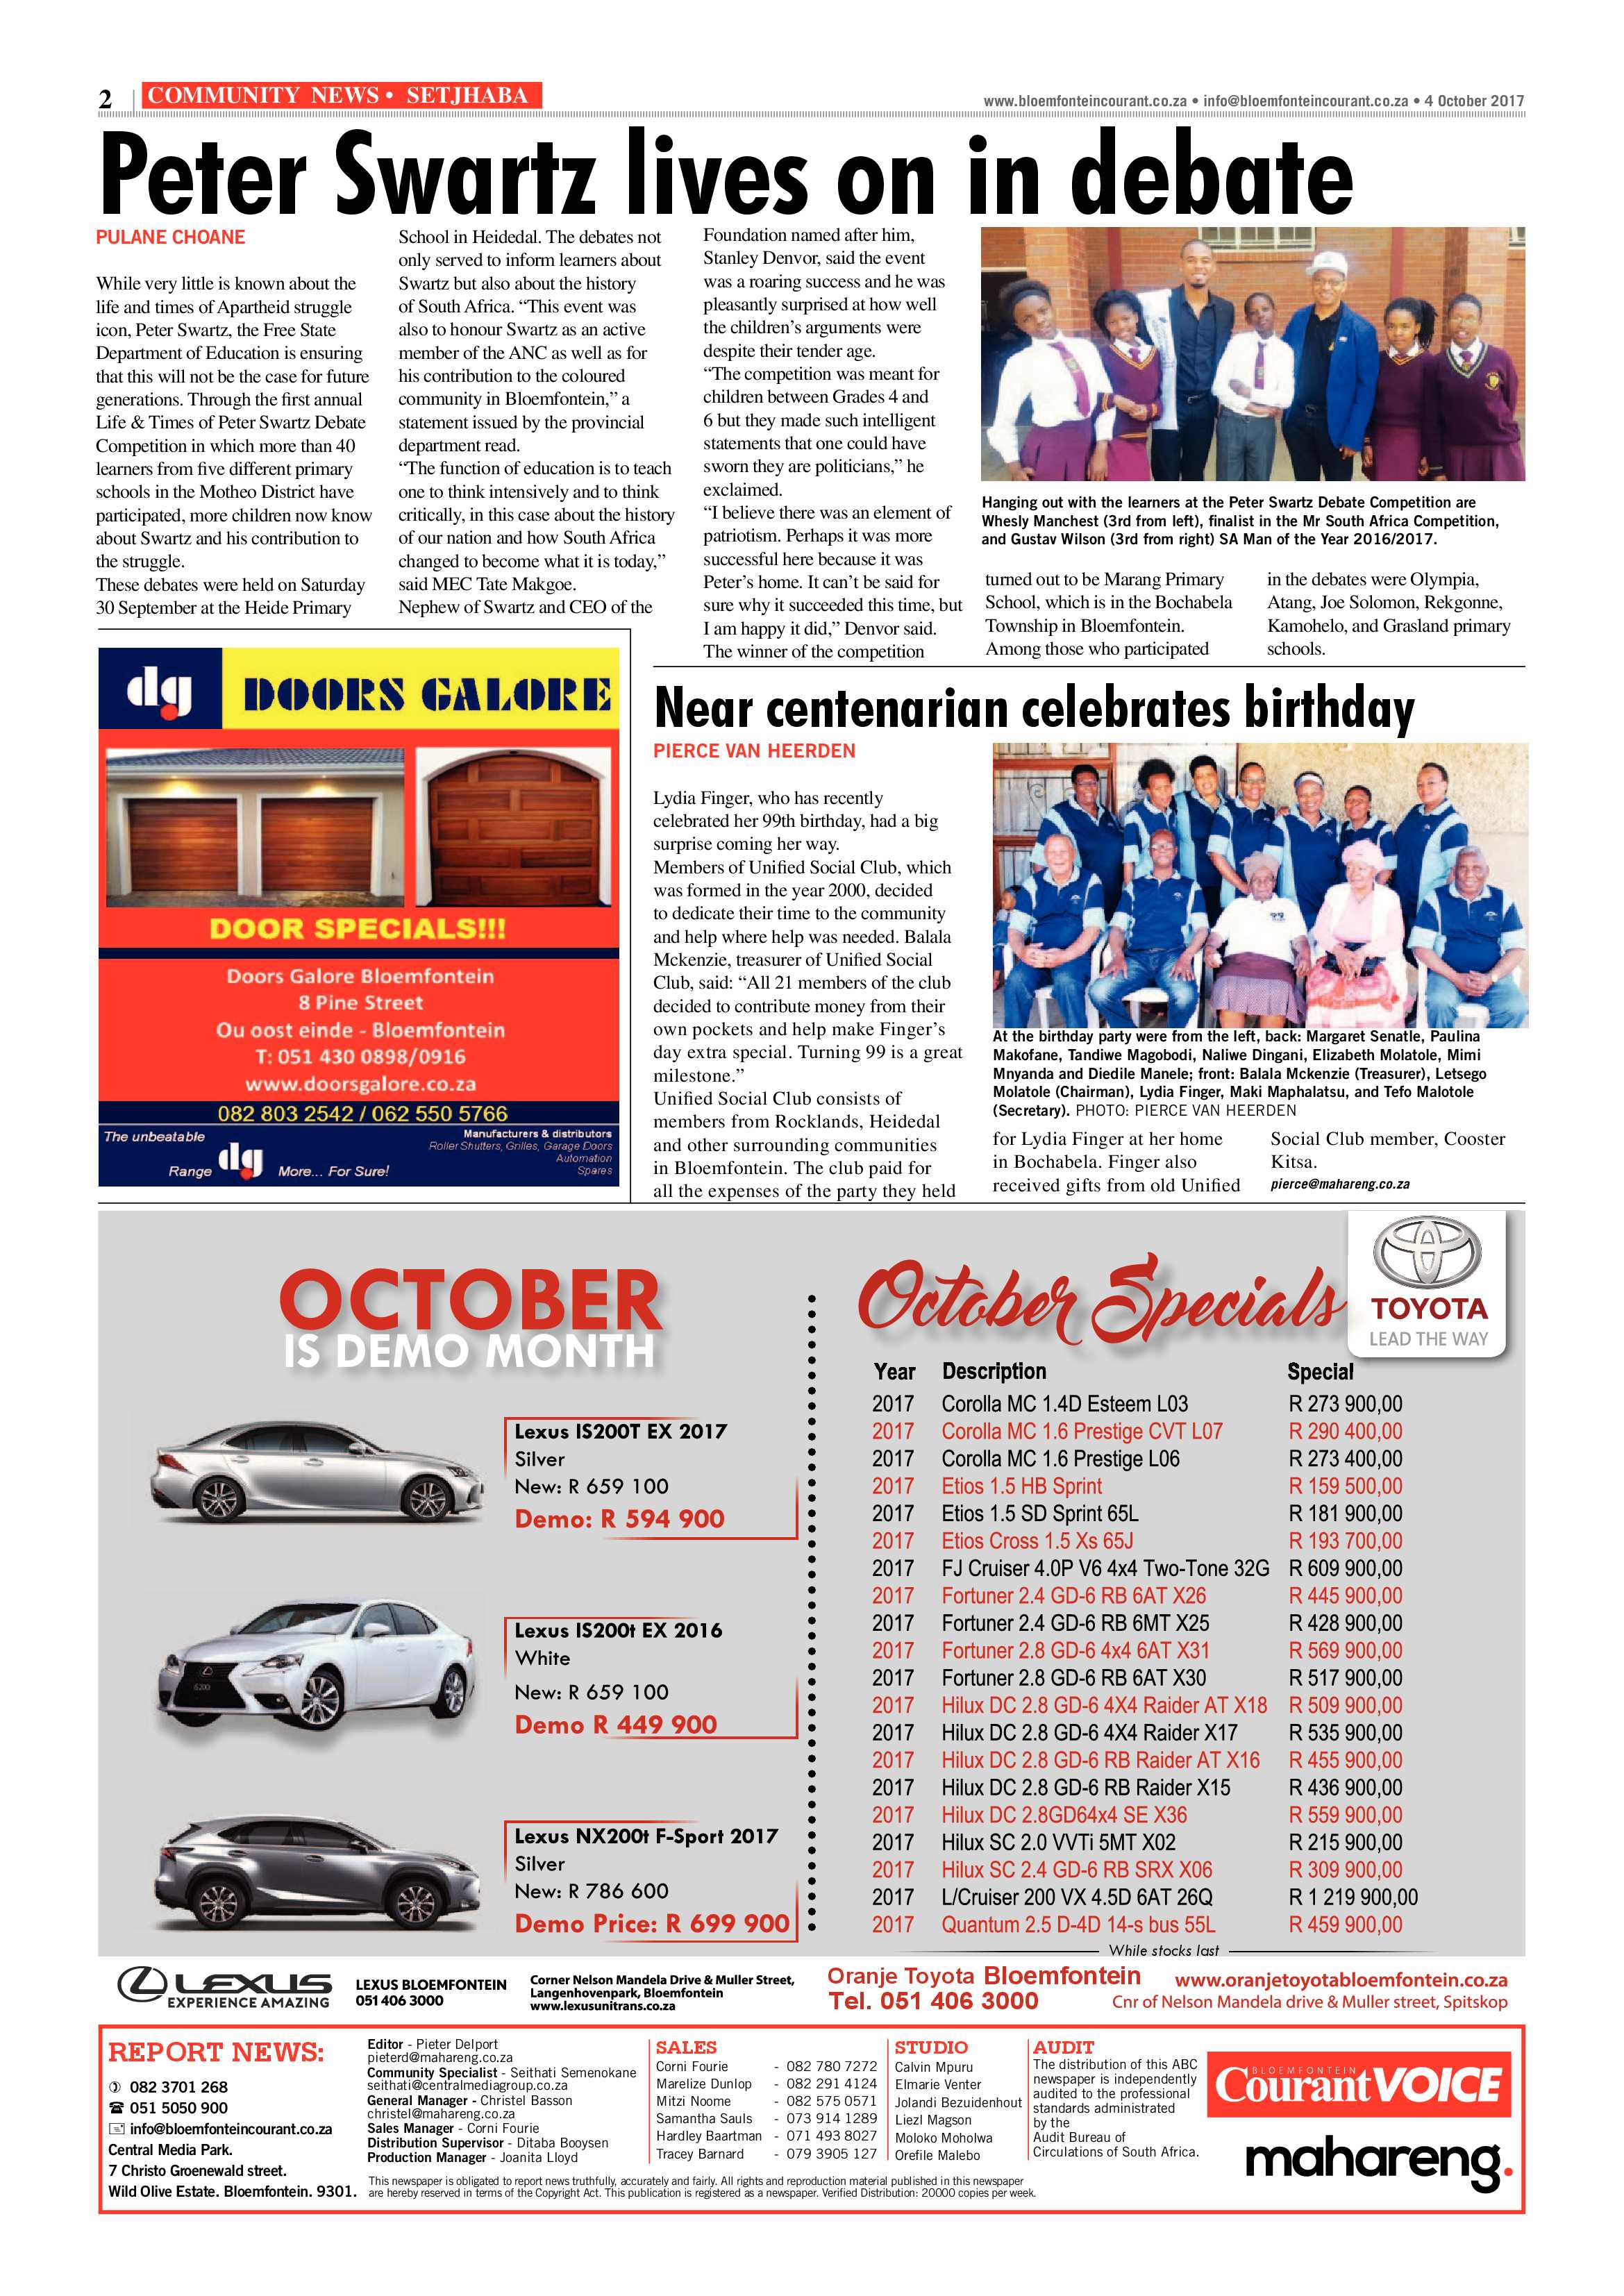 4-october-courant-voice-epapers-page-2